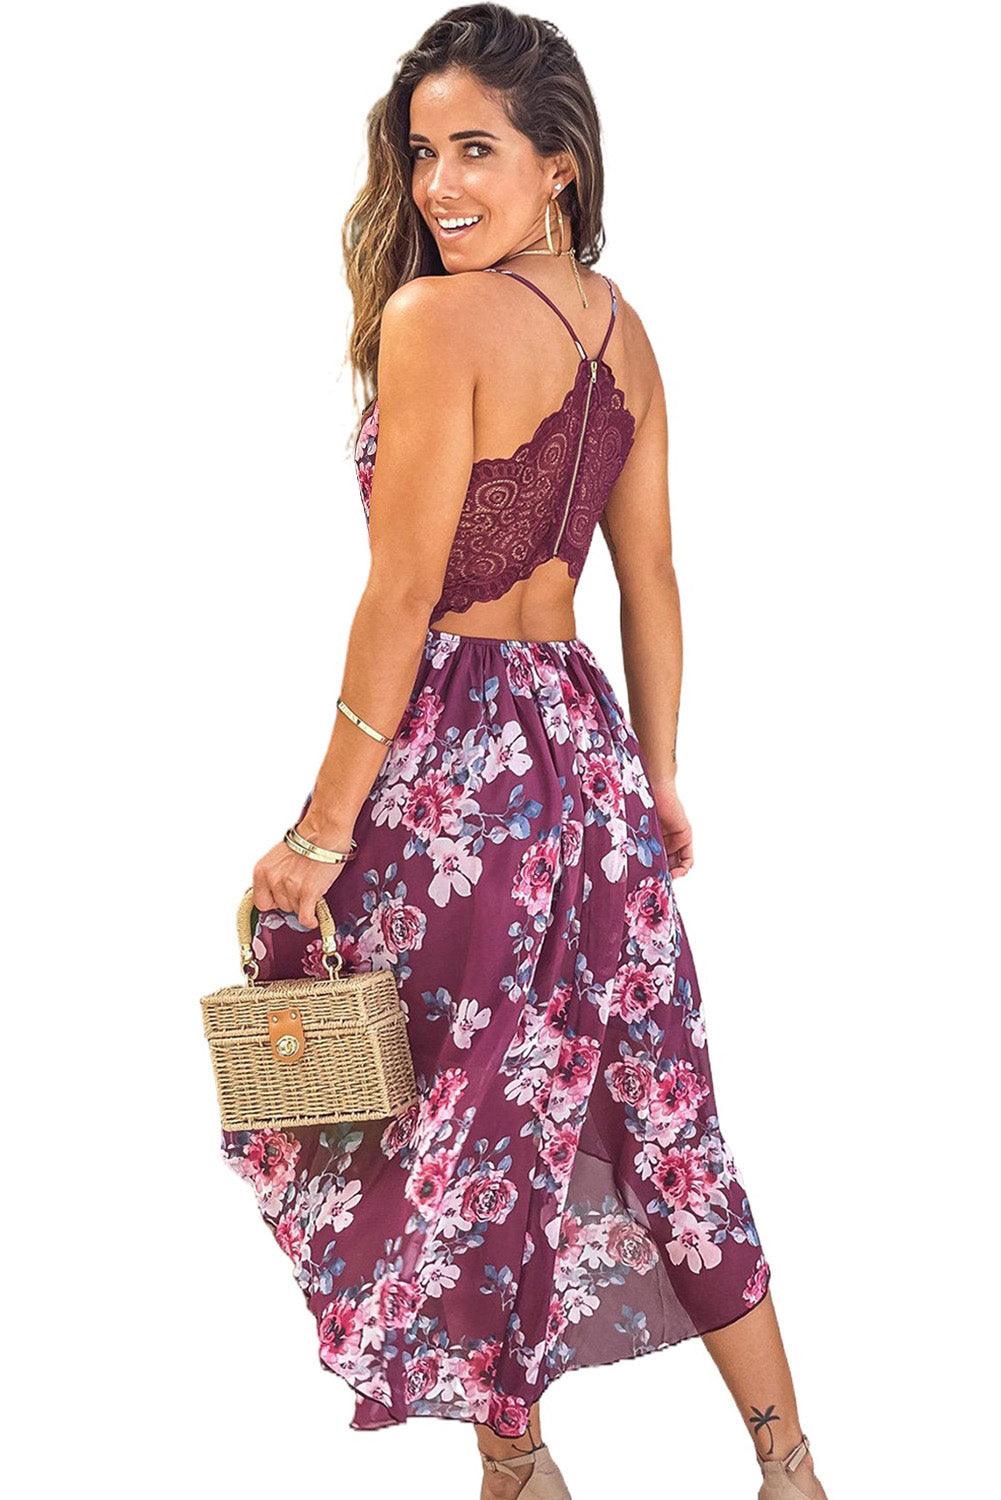 Burgundy Floral High-low Dress with Lace Back - L & M Kee, LLC